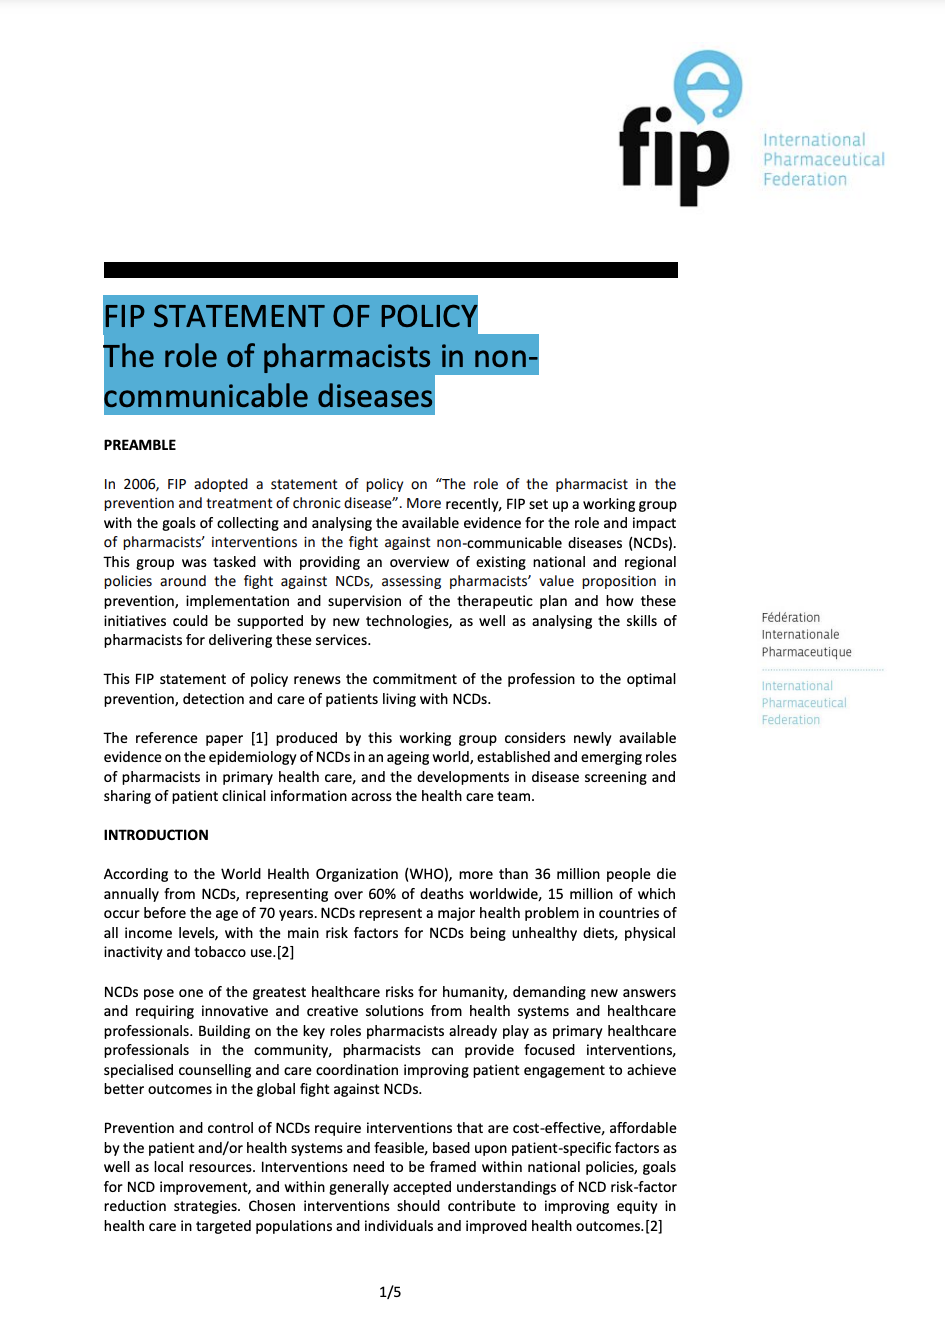 FIP Statement of Policy: The role of pharmacists in non-communicable diseases (2019) Thumbnail